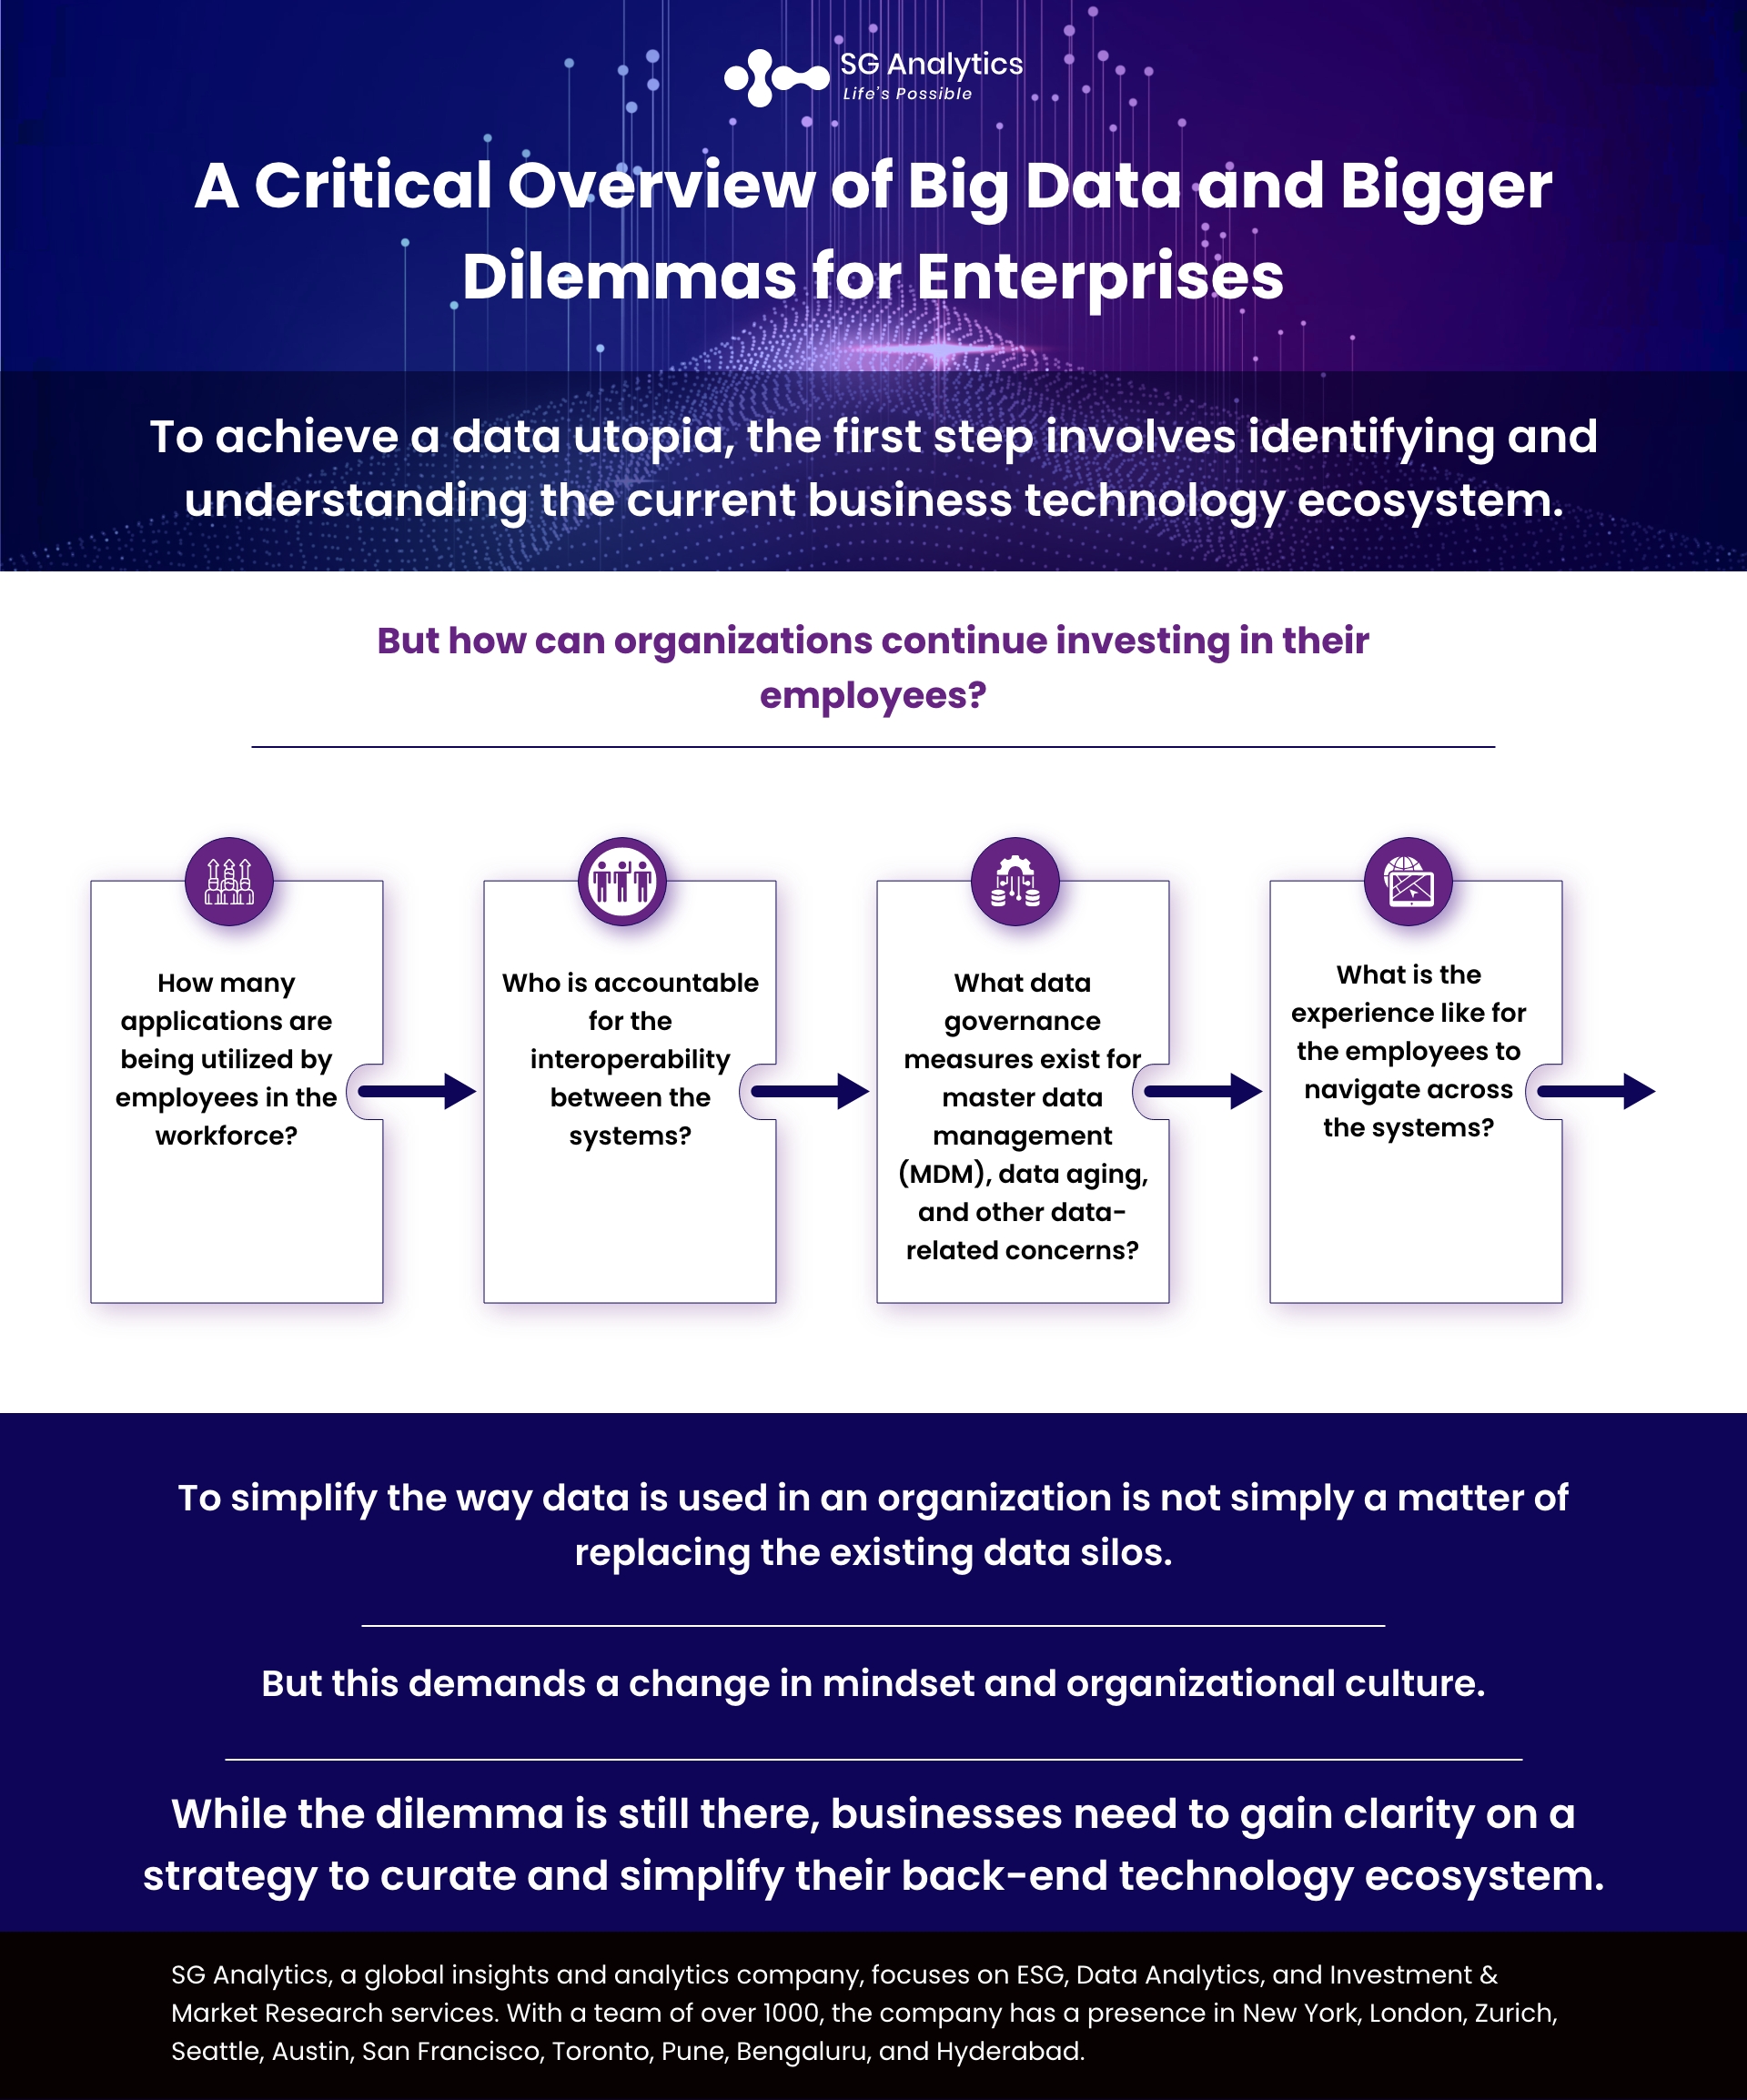 SGAnalytics_Blog_Infographic_A Critical Overview of Big Data and Bigger Dilemmas for Enterprises